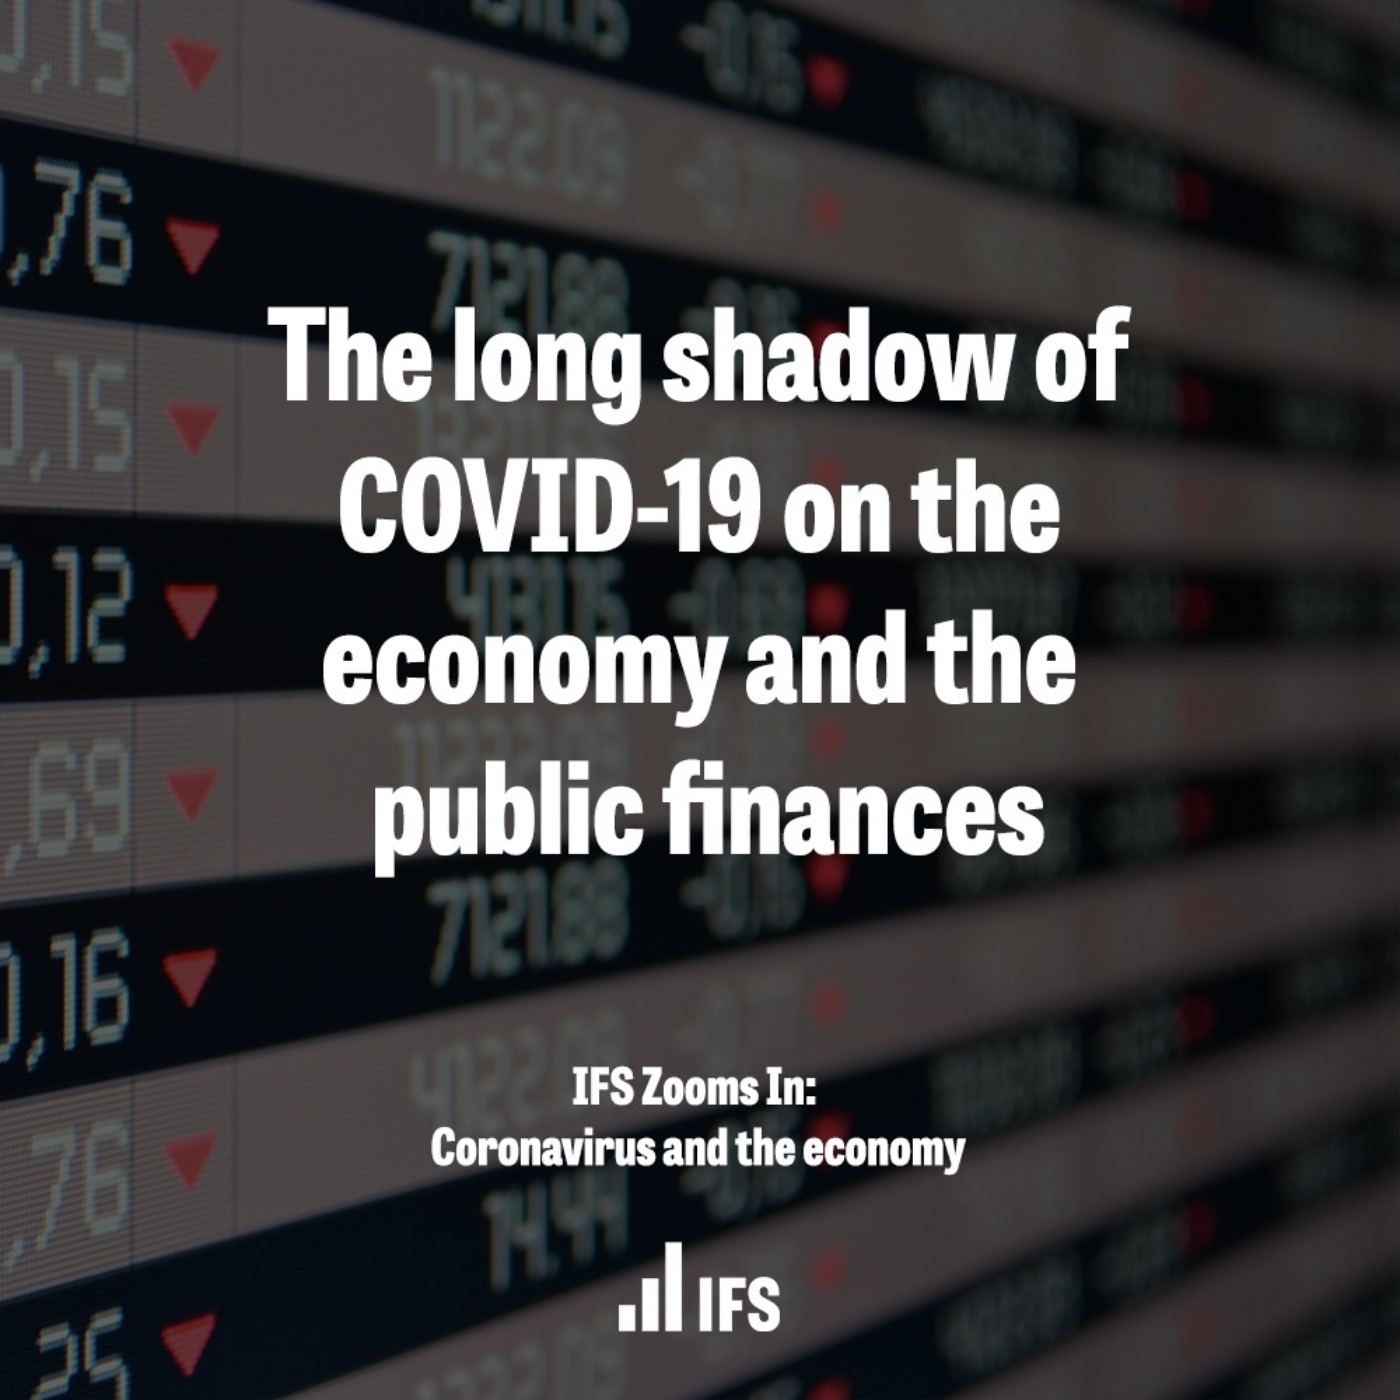 The long shadow of Covid-19 on the economy and the public finances